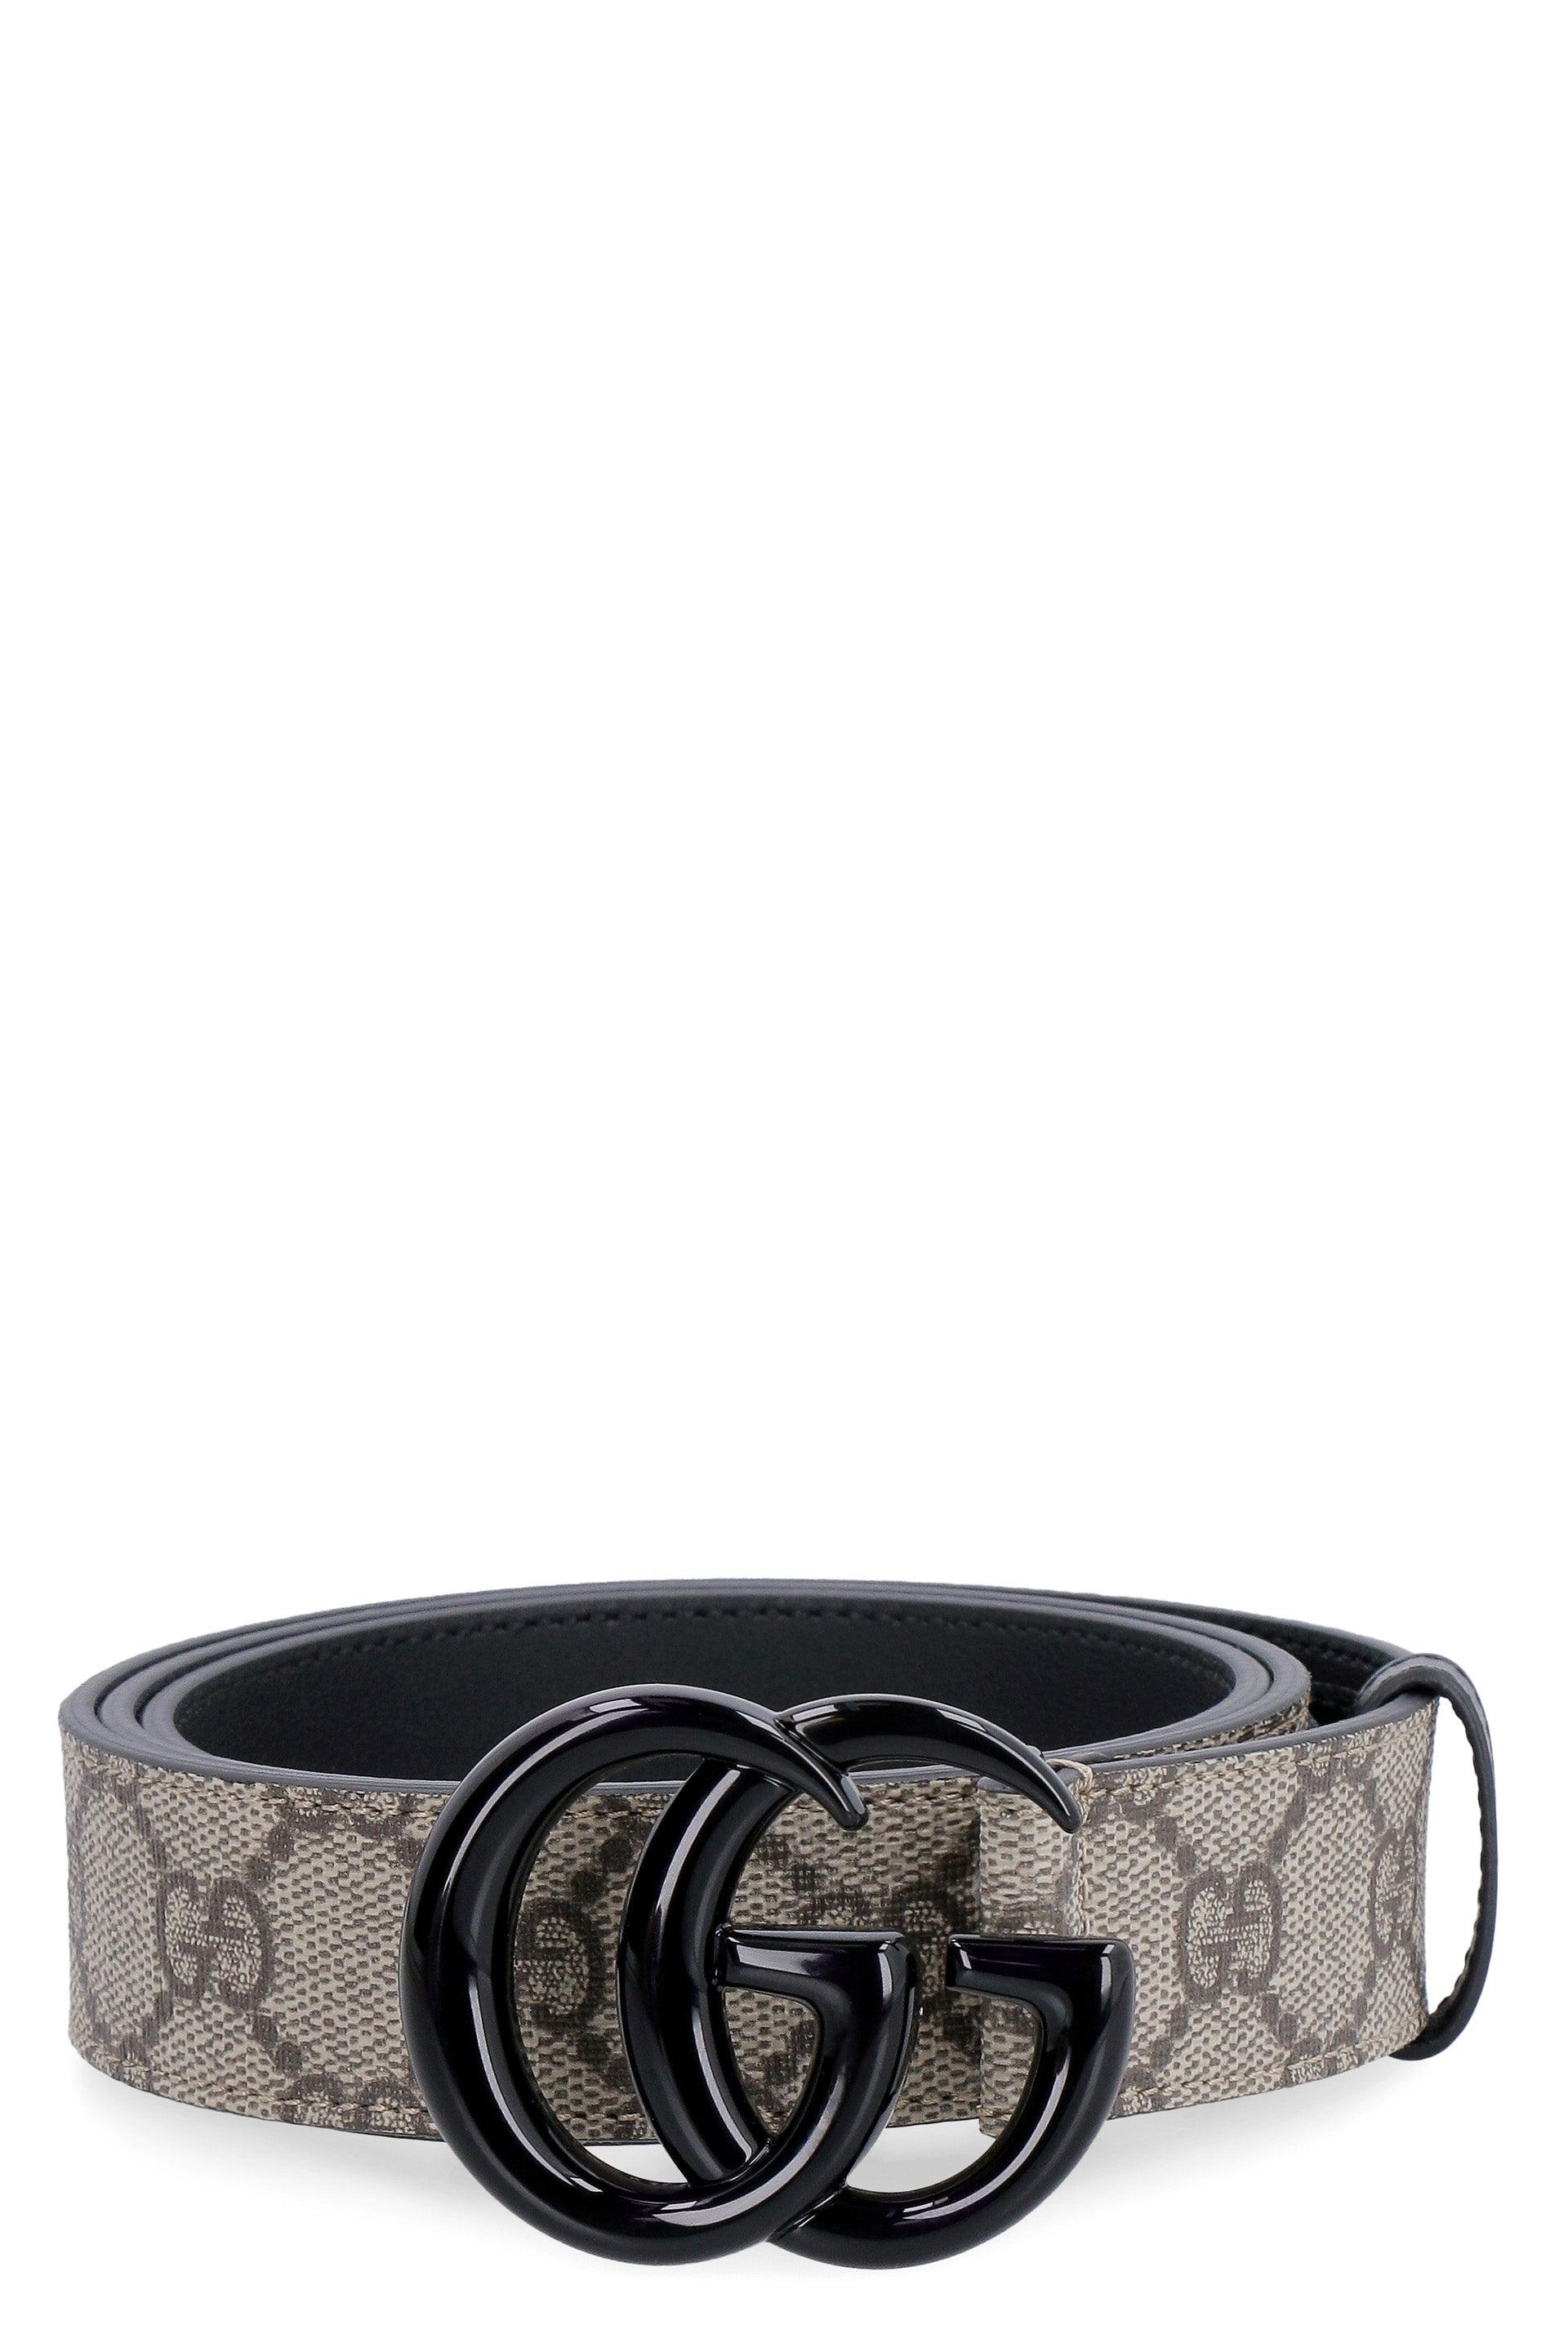 Gucci gg Supreme Fabric Belt in Grey for Men | Lyst UK